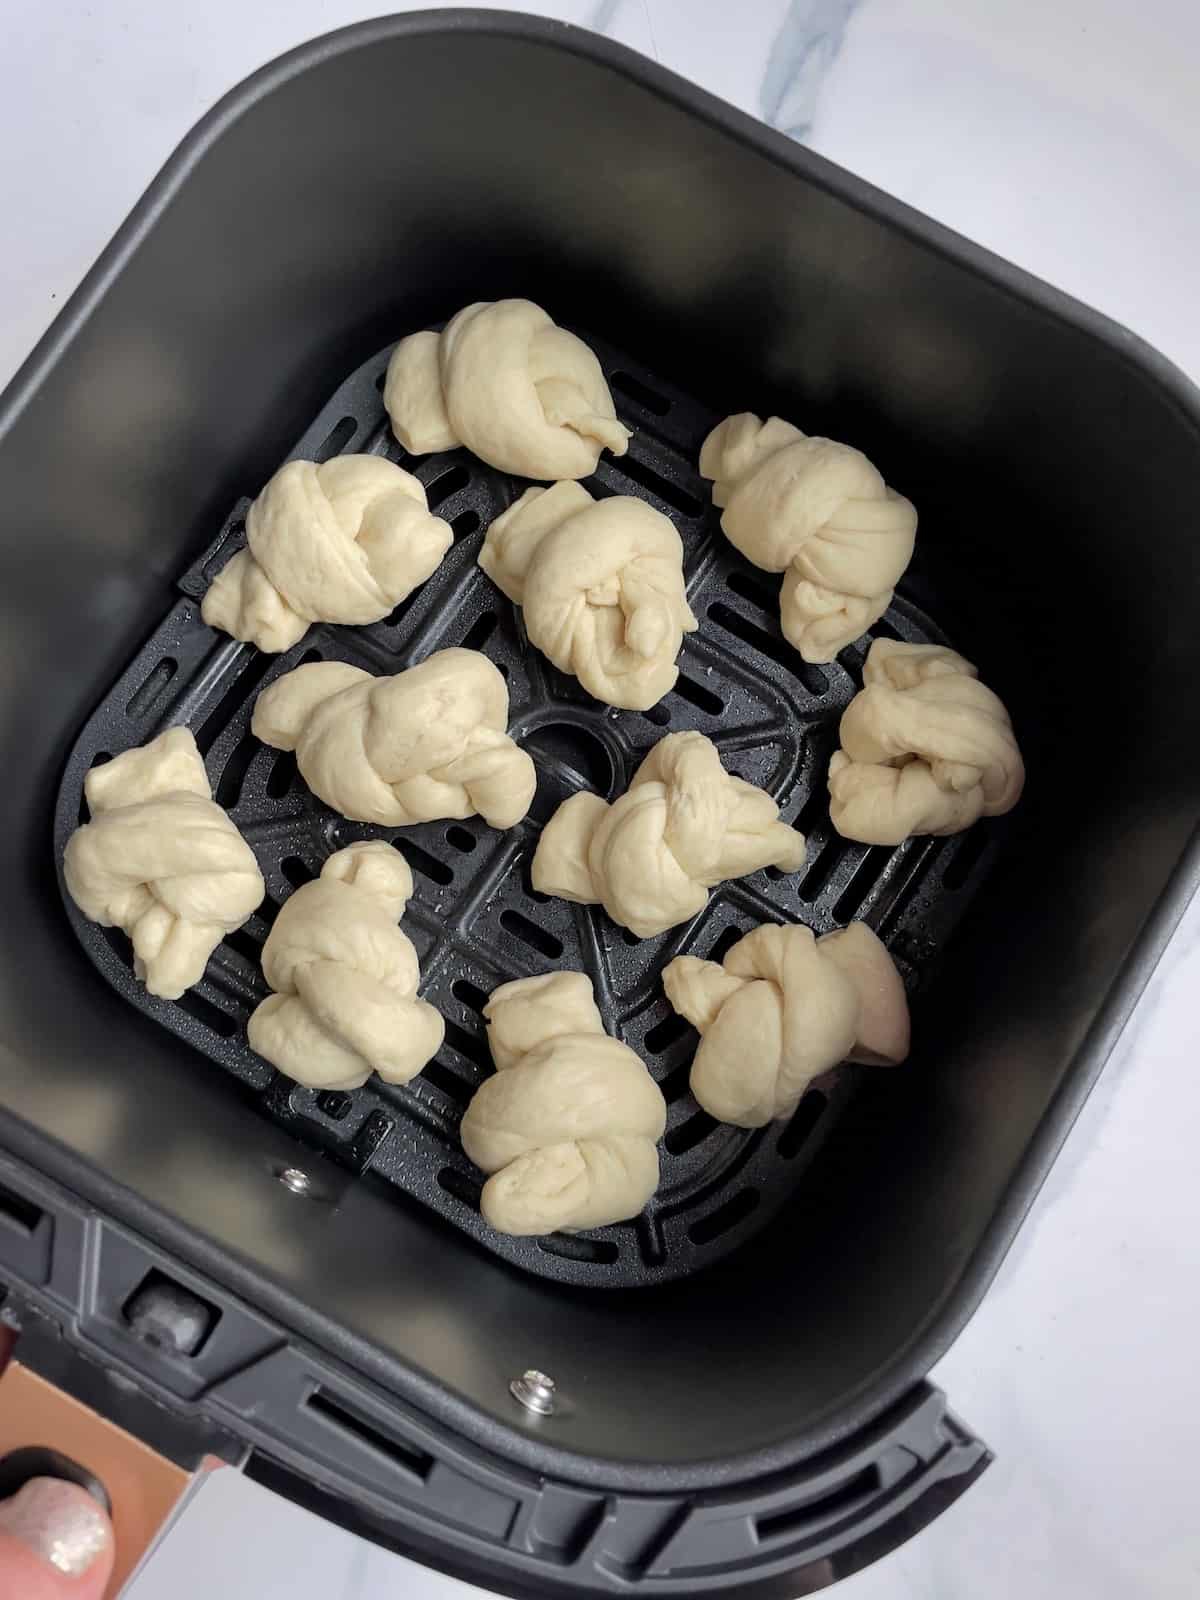 garlic knots in an air fryer basket, uncoked